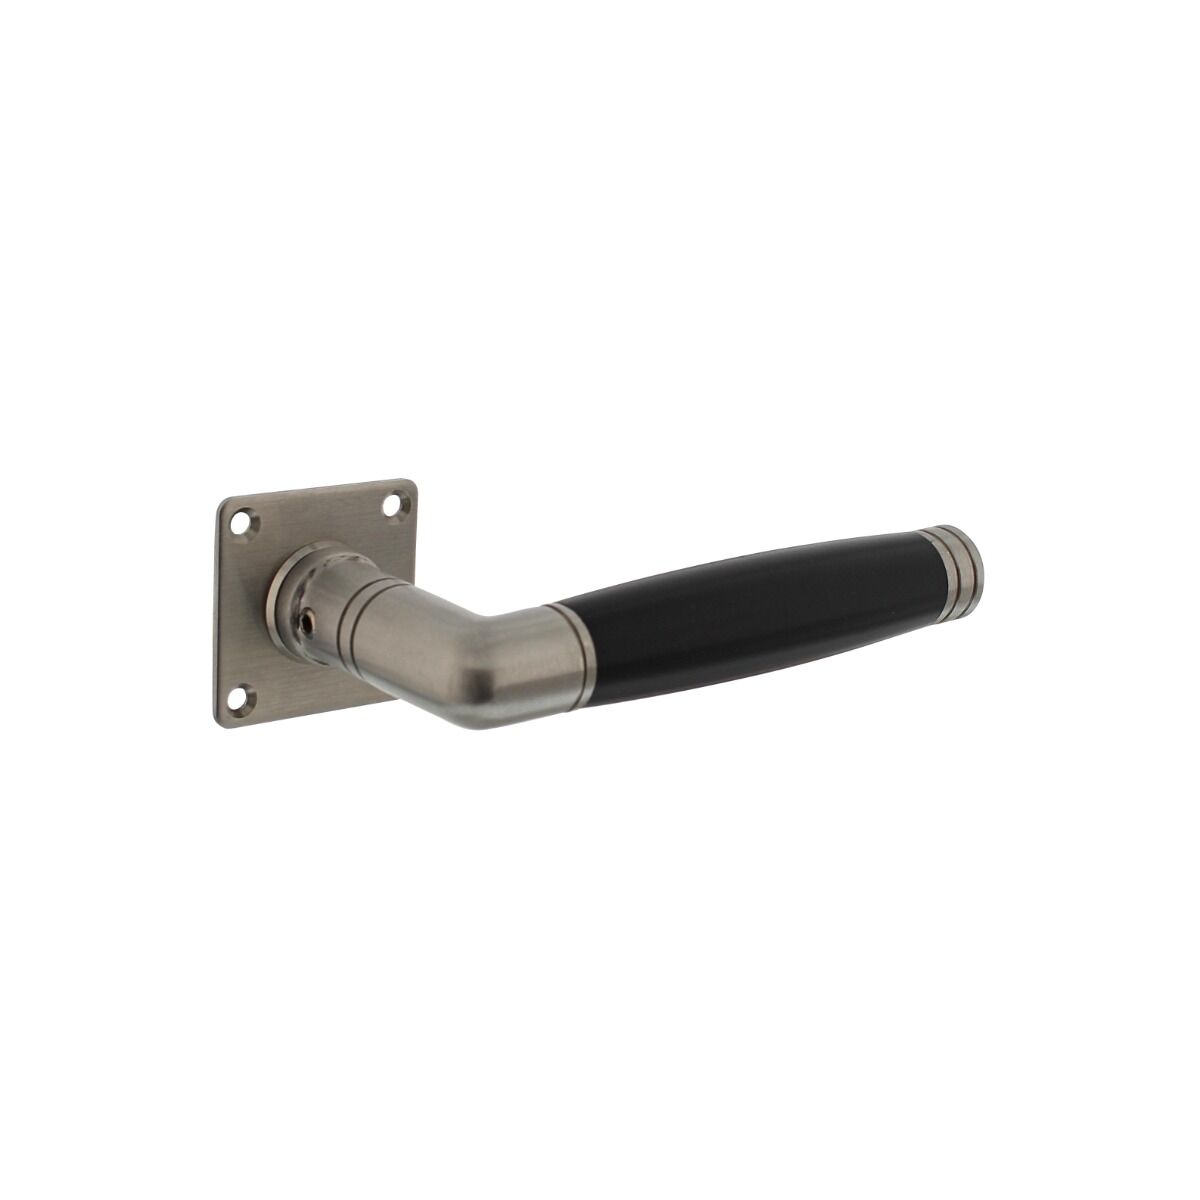 Intersteel Door handle Ton 212 with square rosette 42x42x2 mm brushed stainless steel